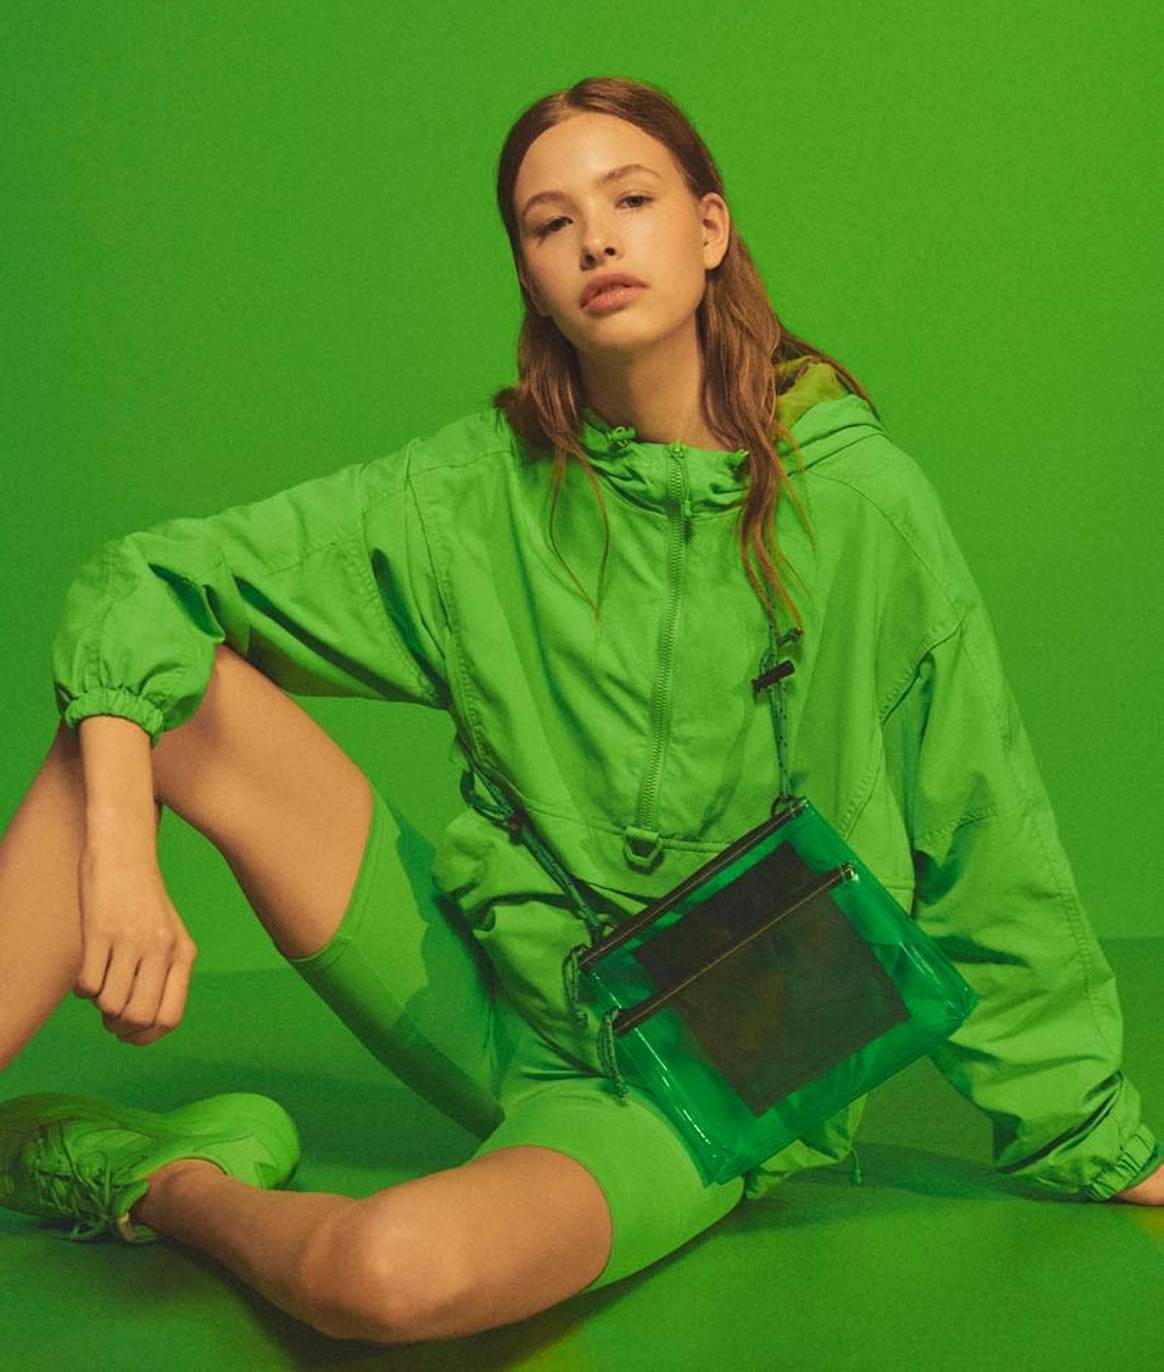 In pictures: Bershka teams up with Pantone for monochromatic capsule collection